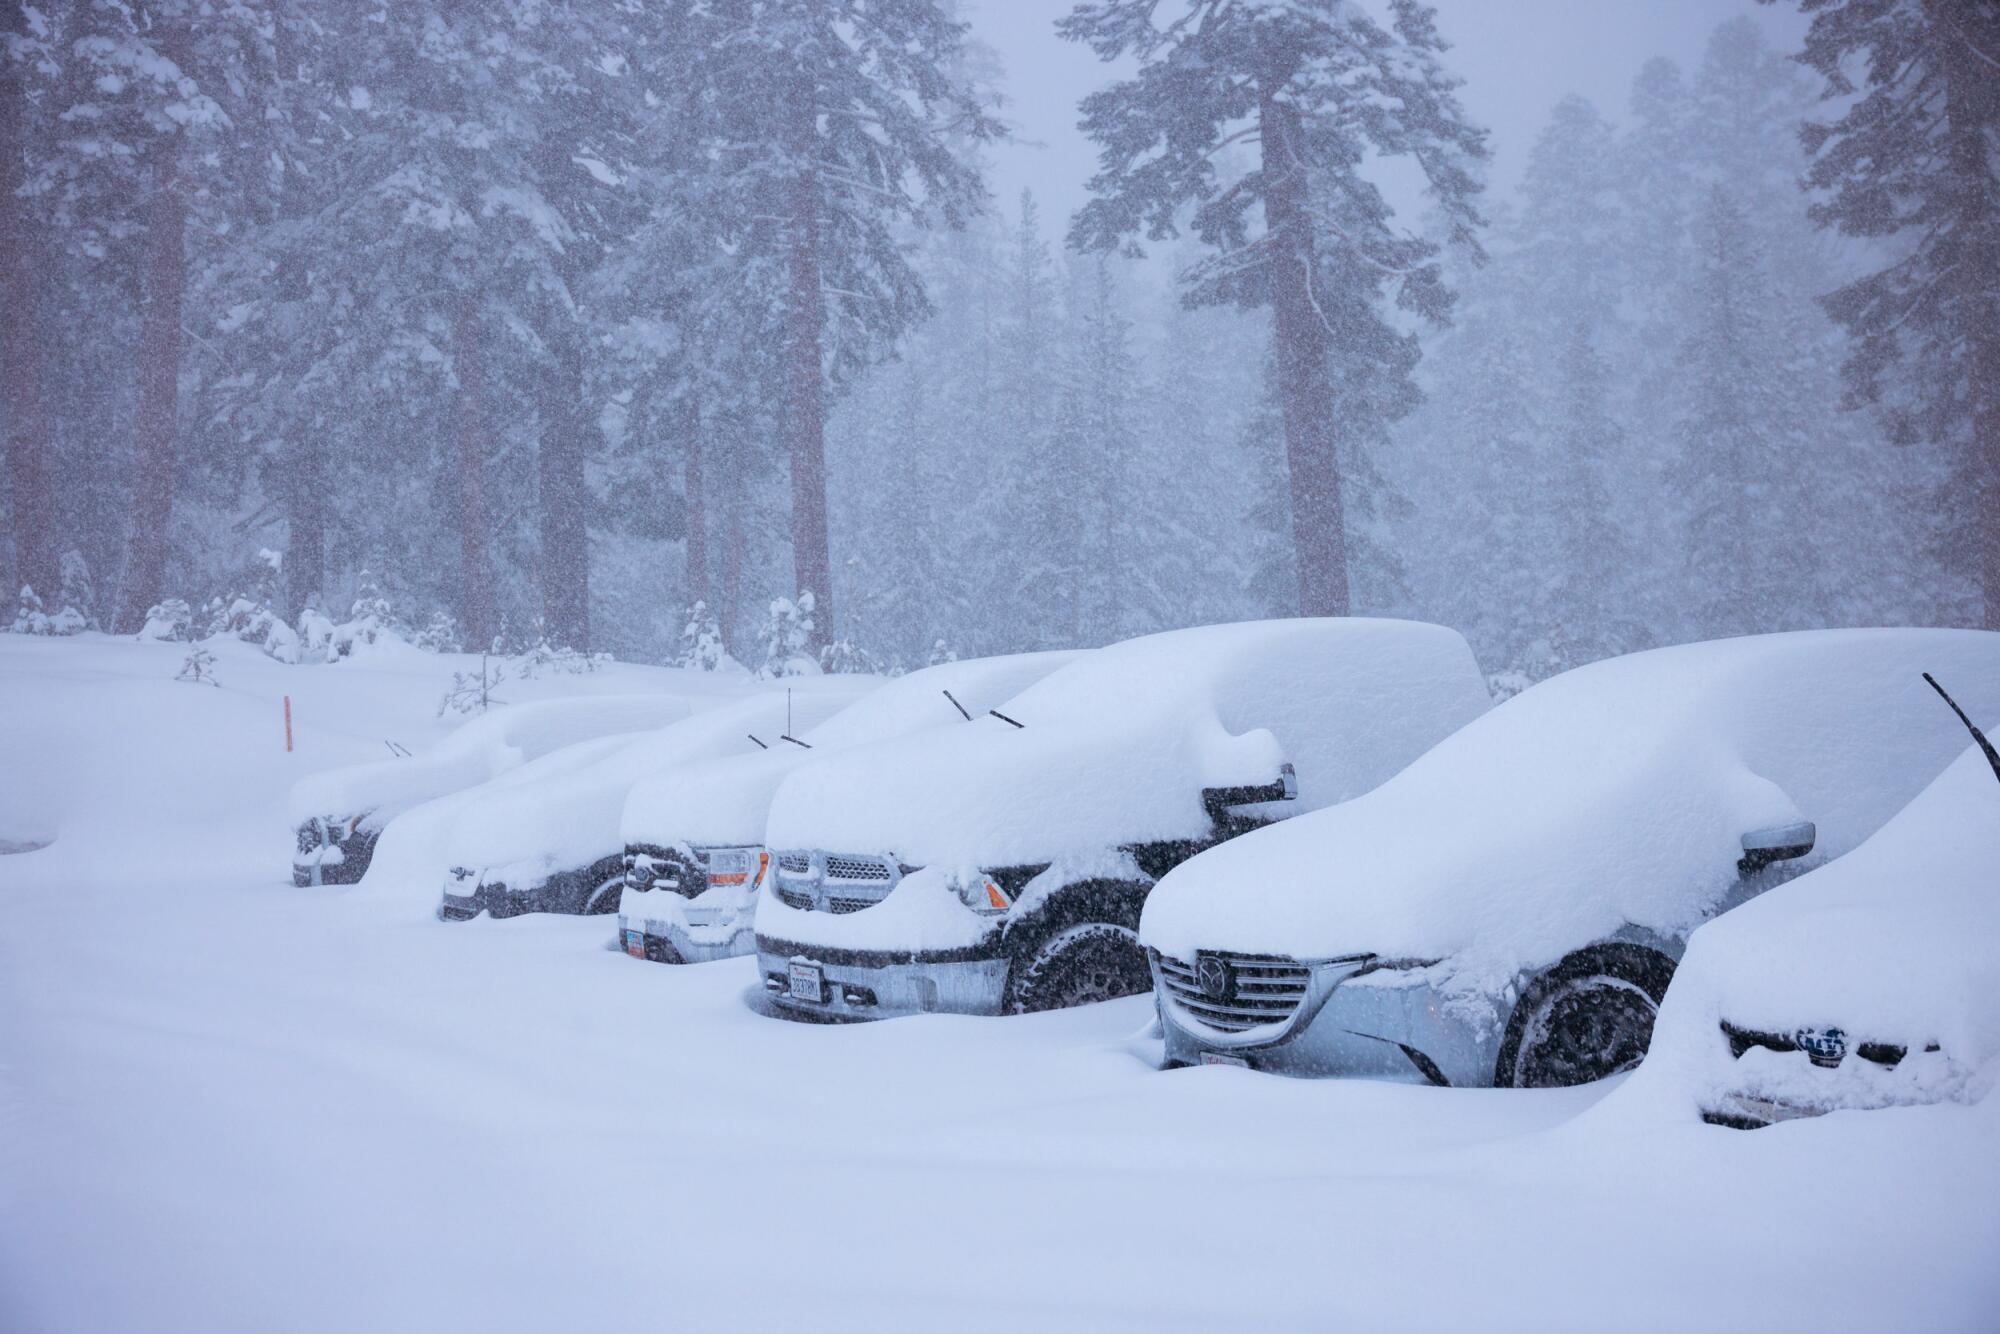 Mammoth Mountain received over a foot of new snow on Feb. 4, with an additional 60 inches forecast over the next 10 days.